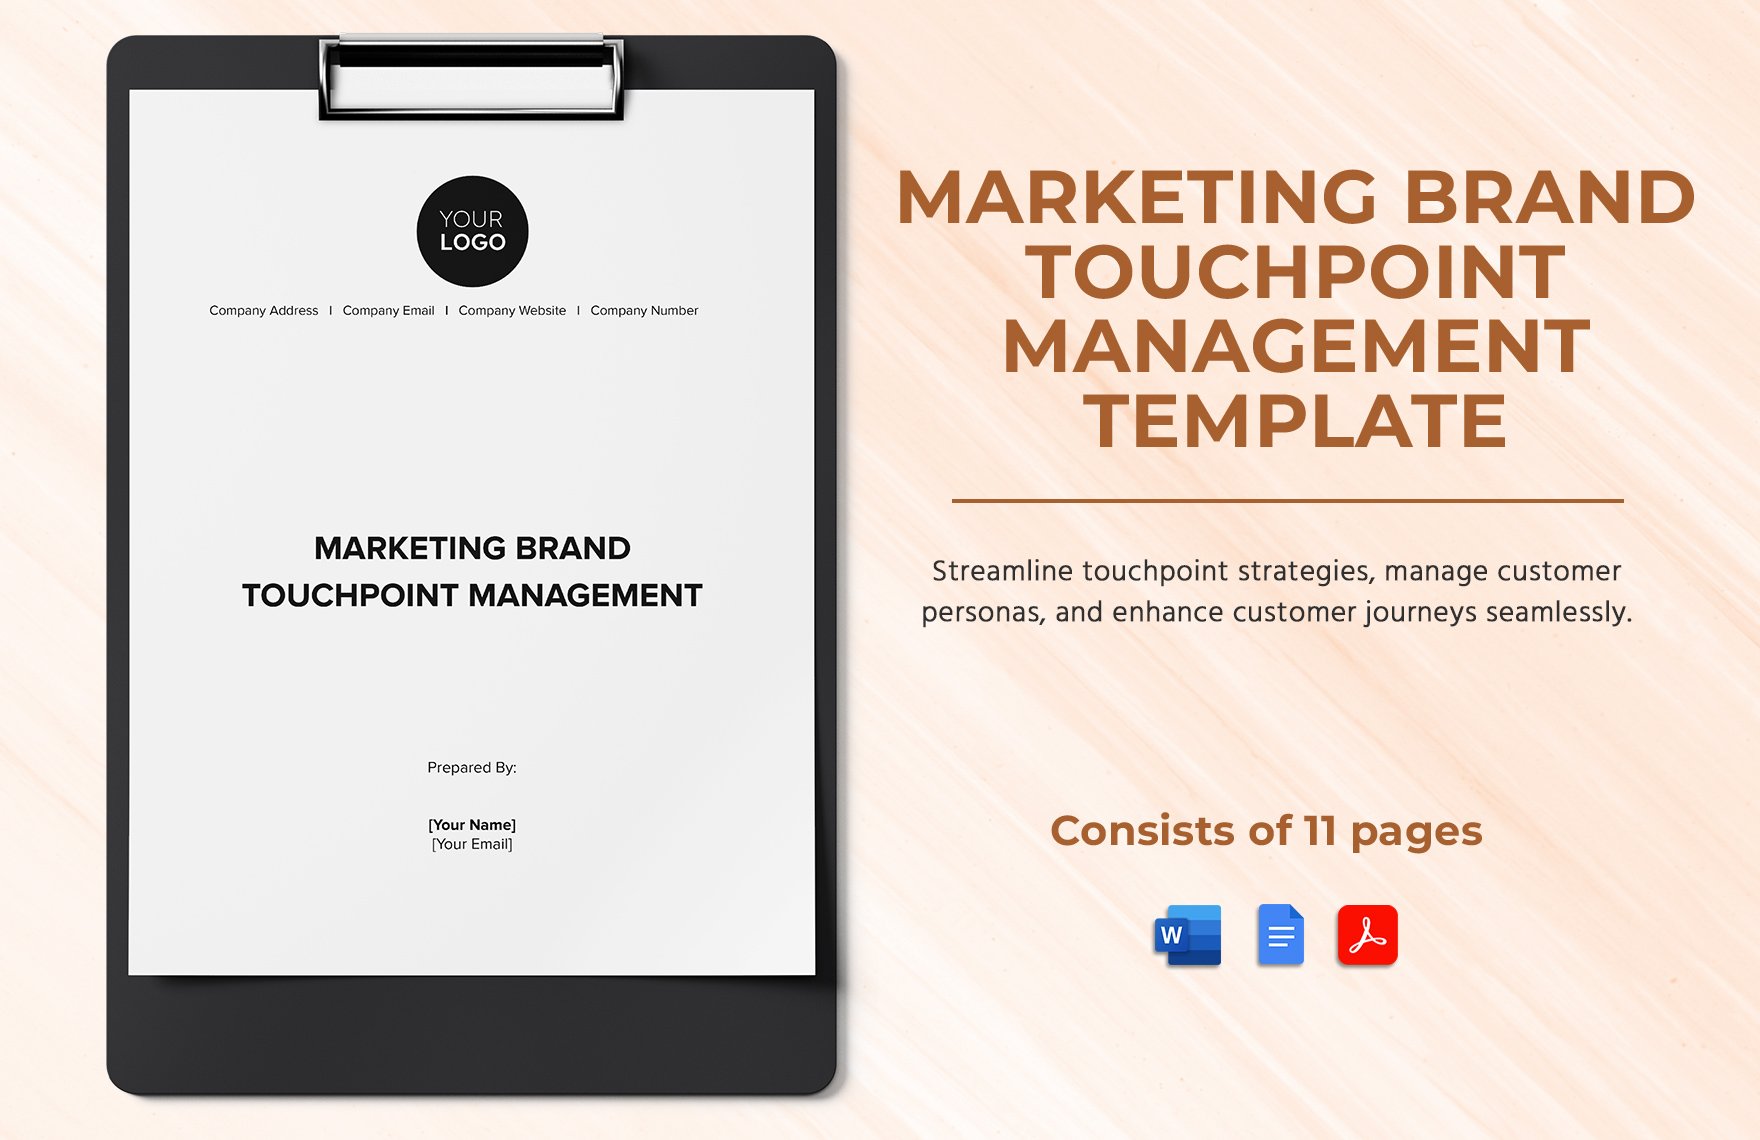 Marketing Brand Touchpoint Management Template in Word, Google Docs, PDF